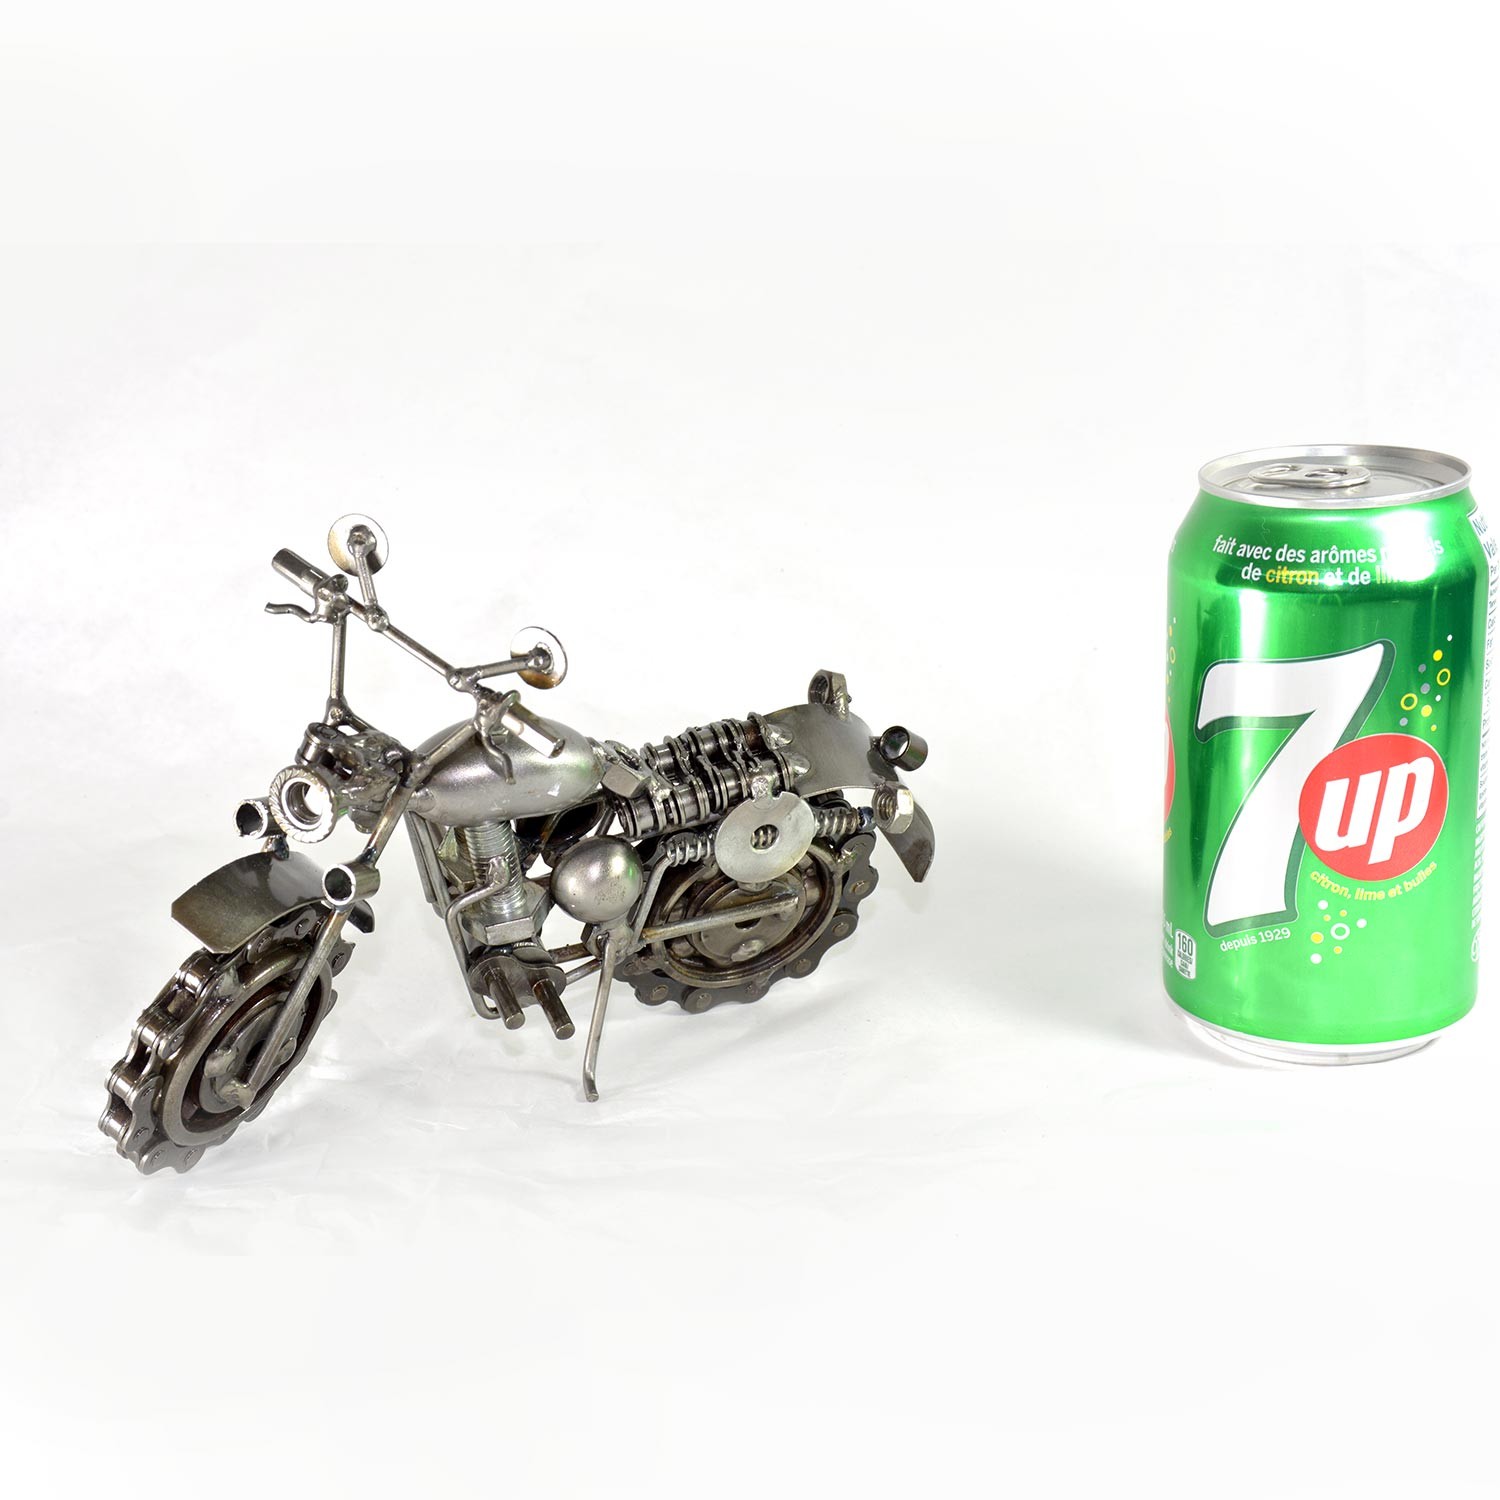 Metal Motorcycle Figurine, Scrap Steel Chopper, Nuts and Bolts